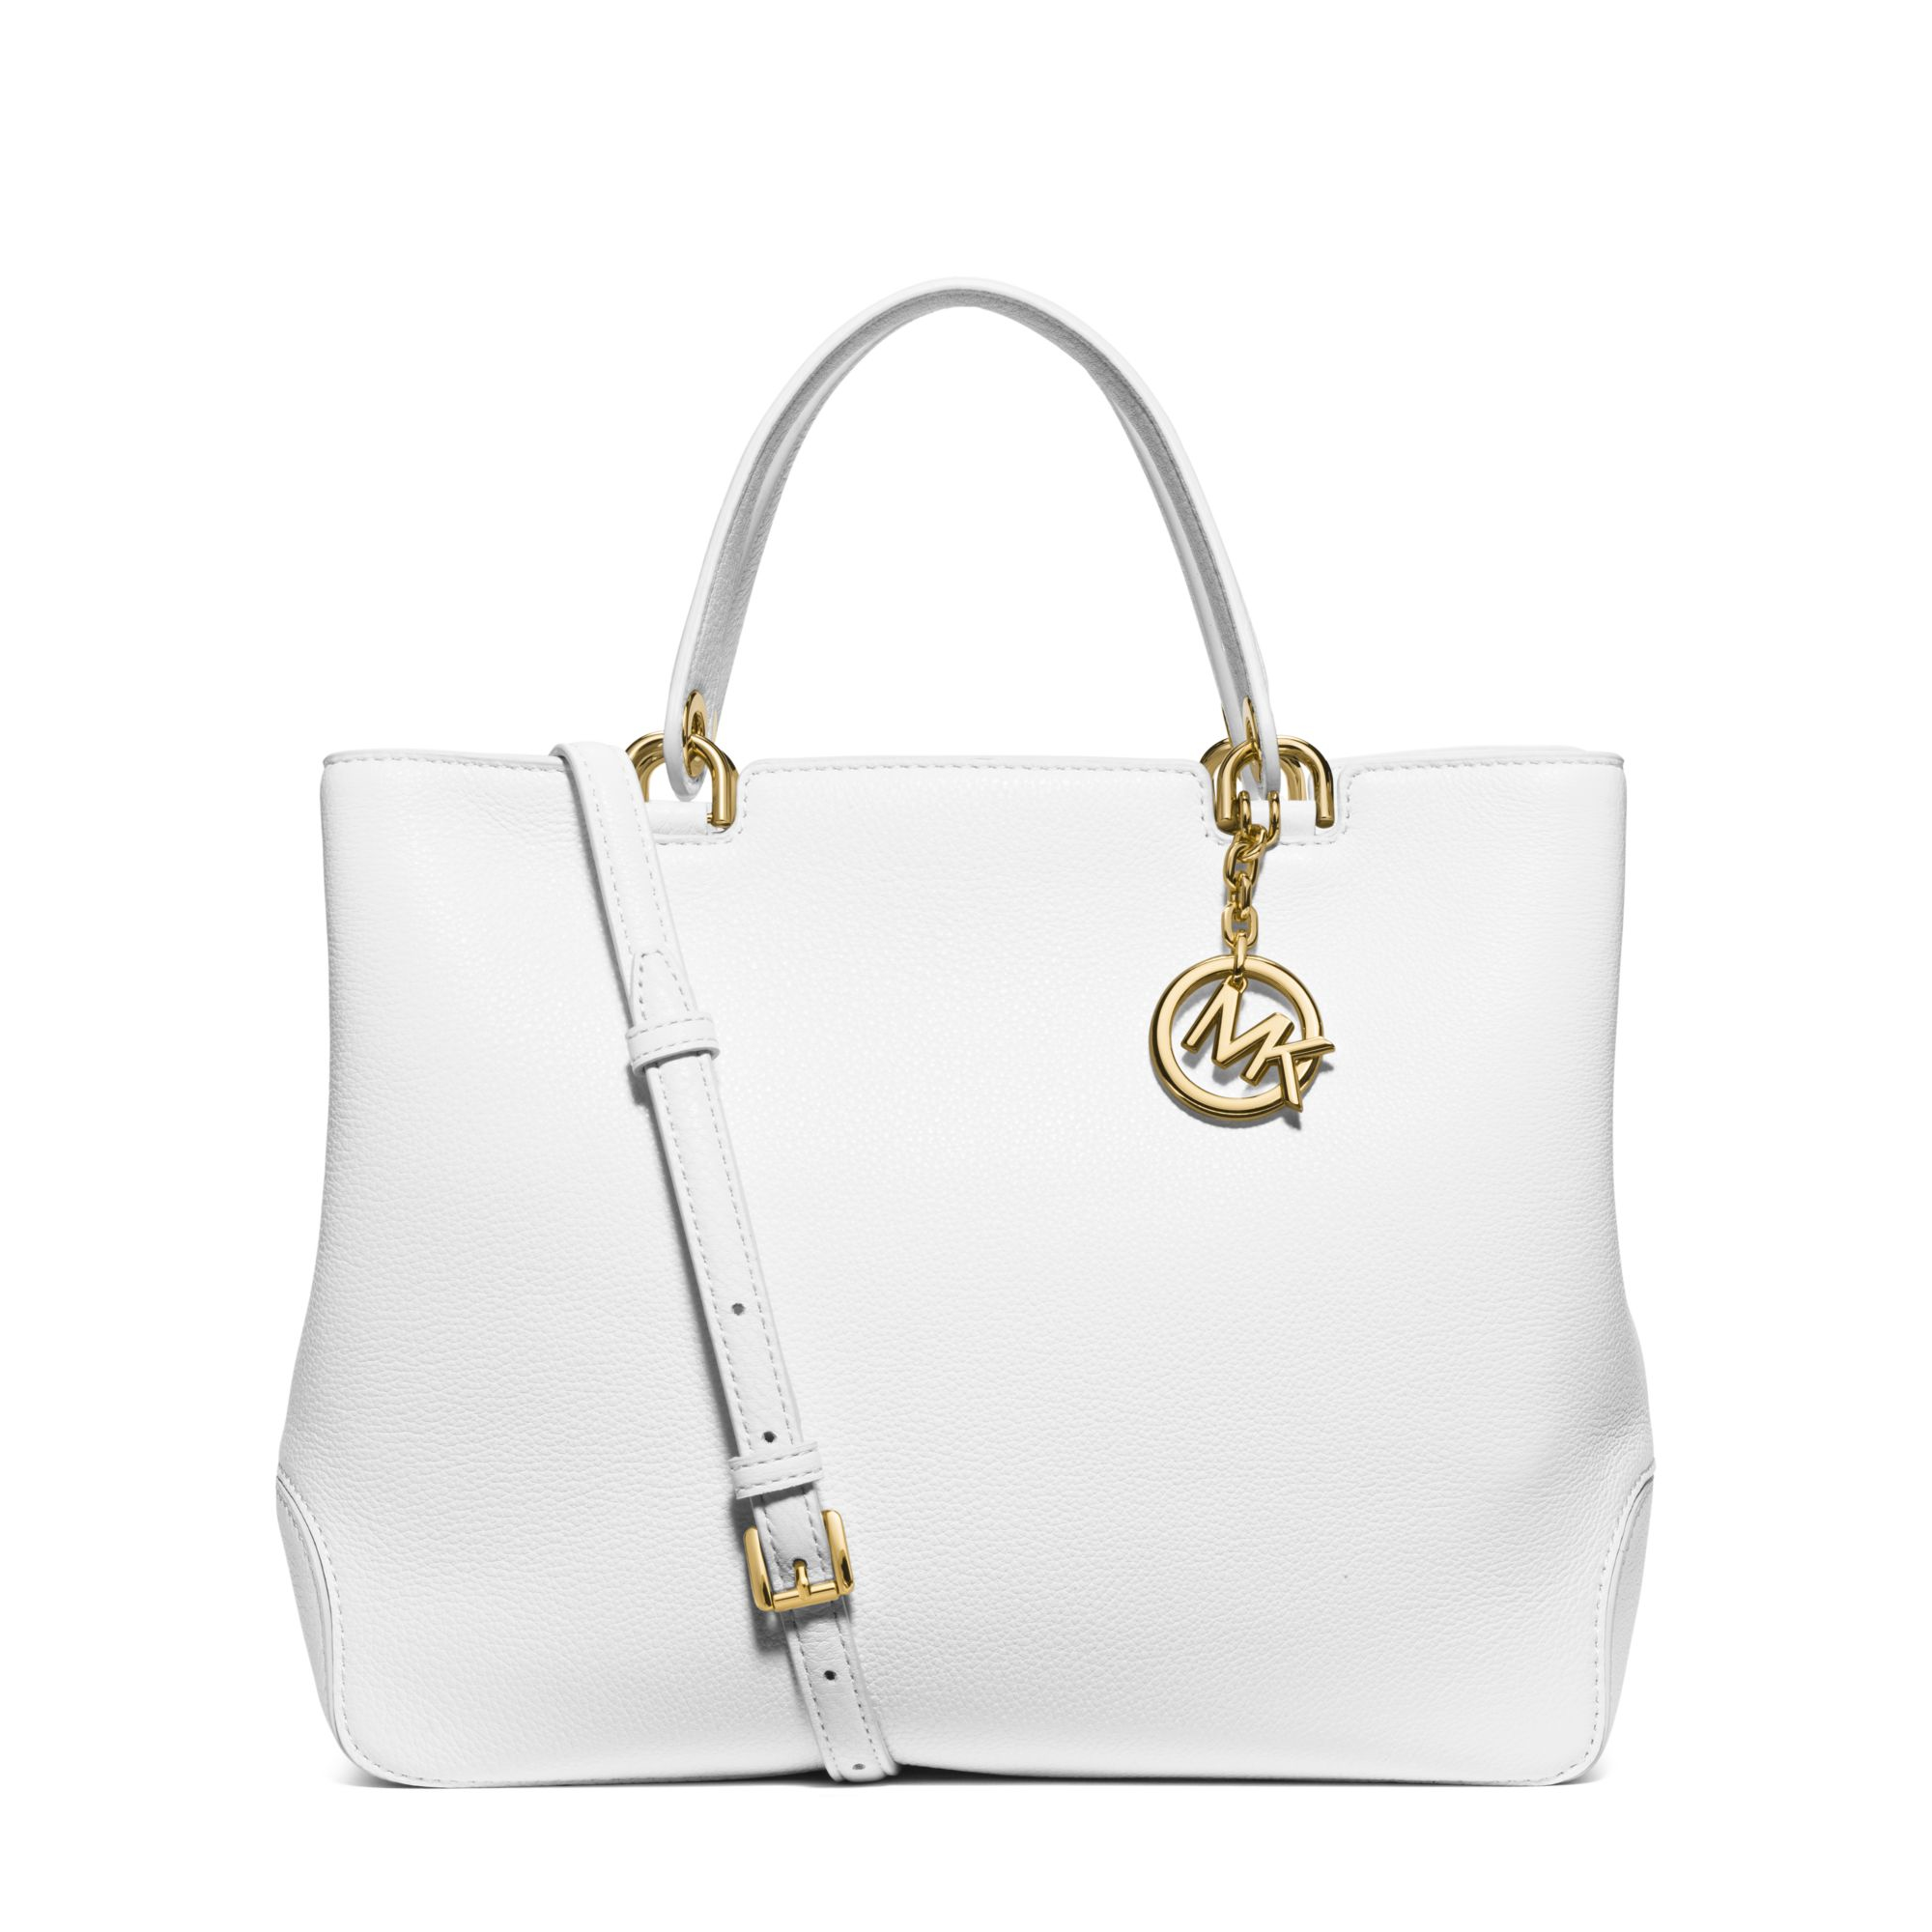 michael kors anabelle leather tote